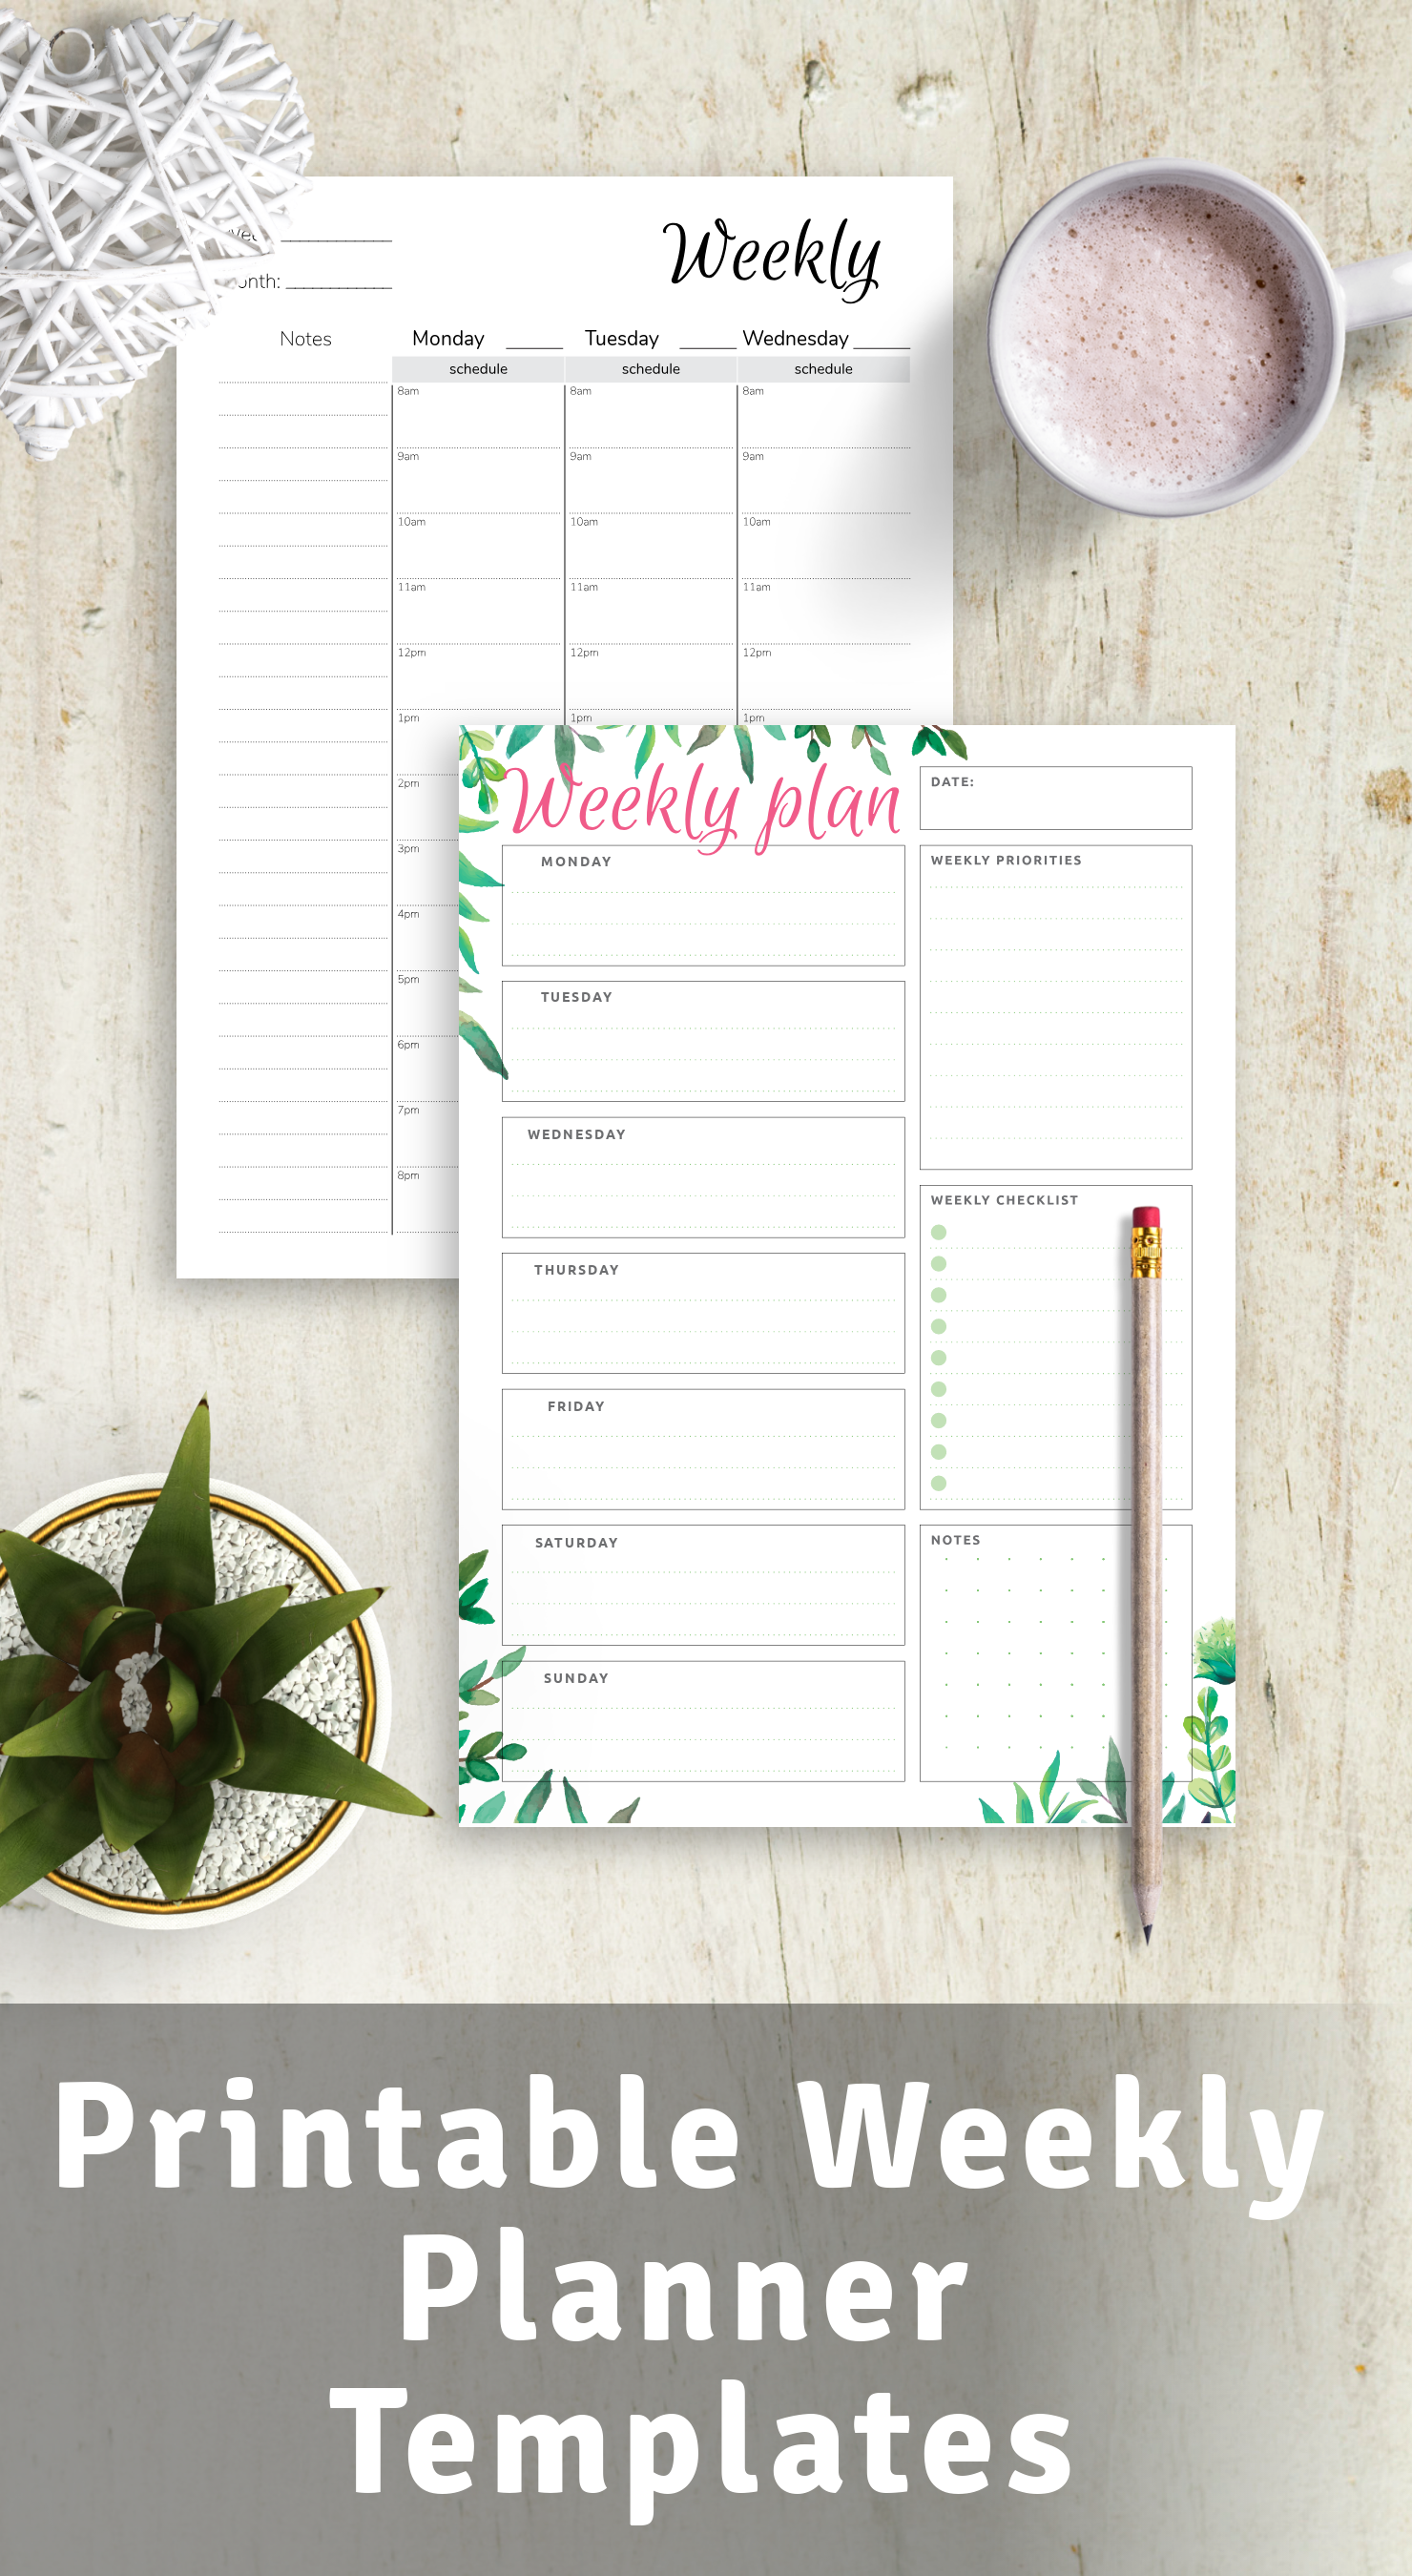 Printable Weekly Planner Templates - Download PDF With Monthly Meeting Calendar Template